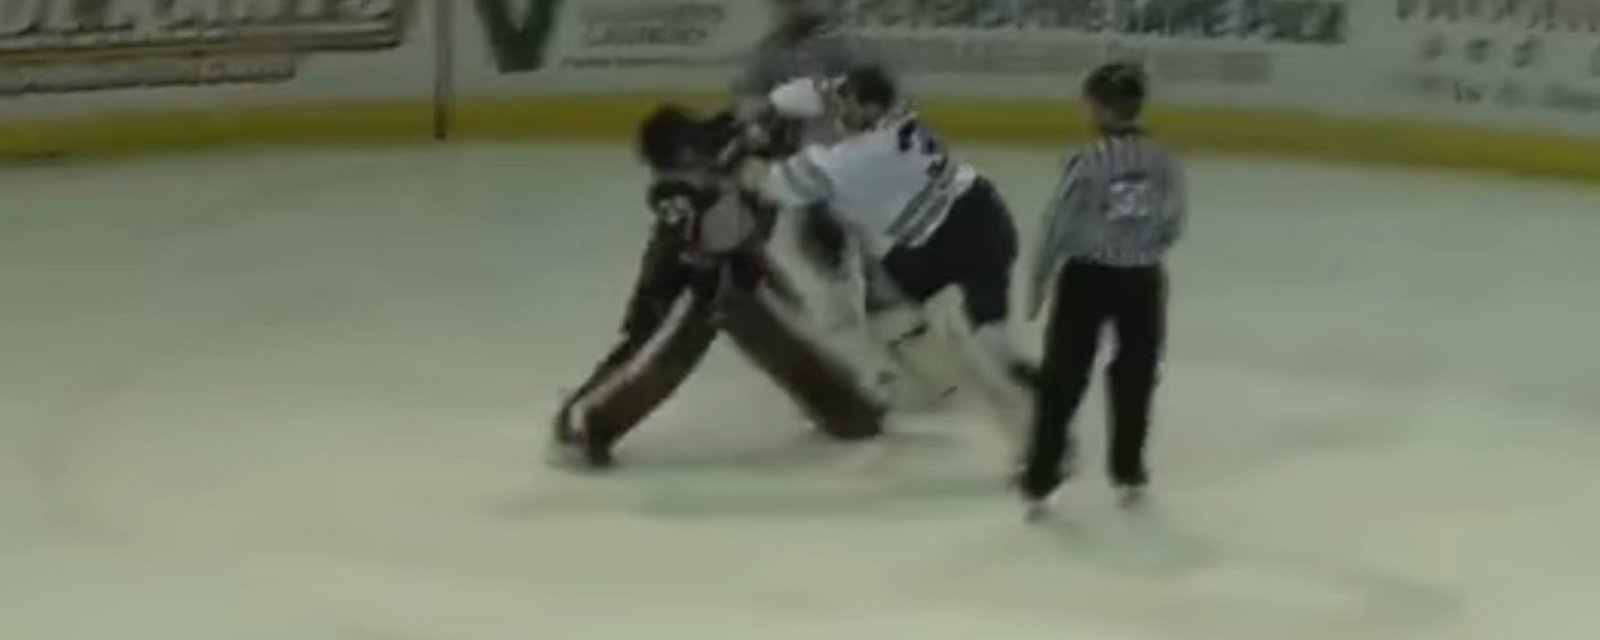 Two goalies throw down after a stoppage in play.